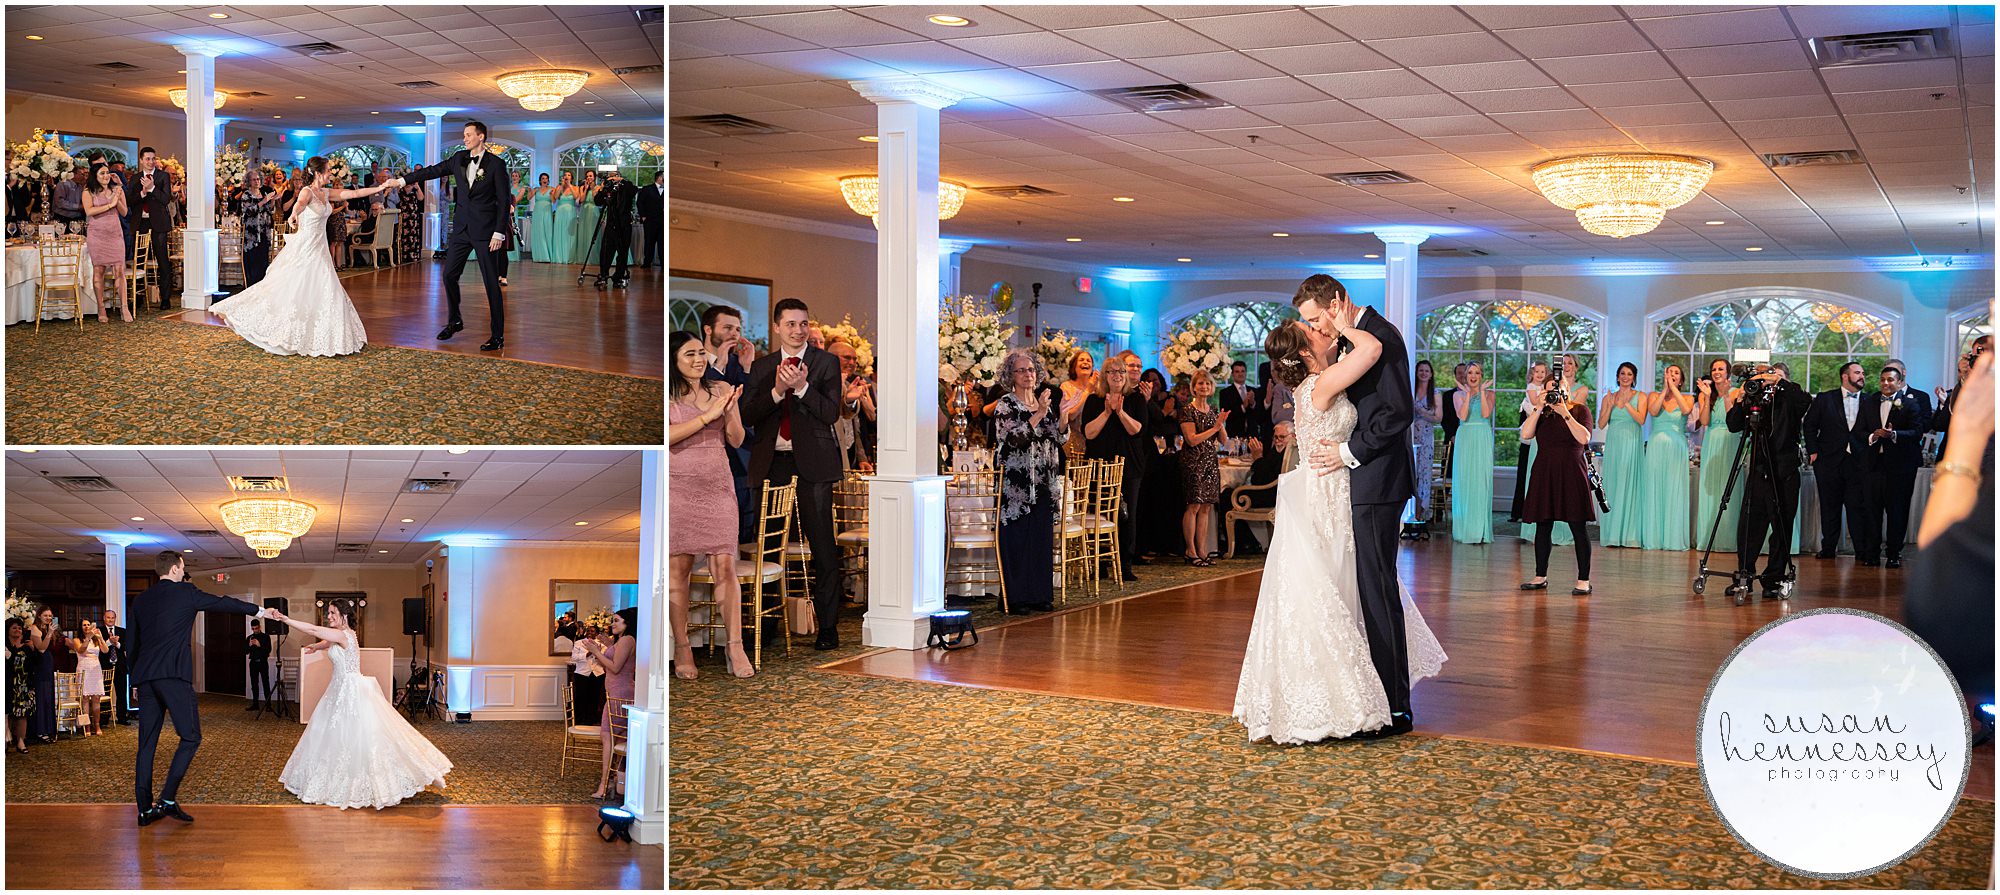 A groom twirls his bride at their South Jersey wedding.